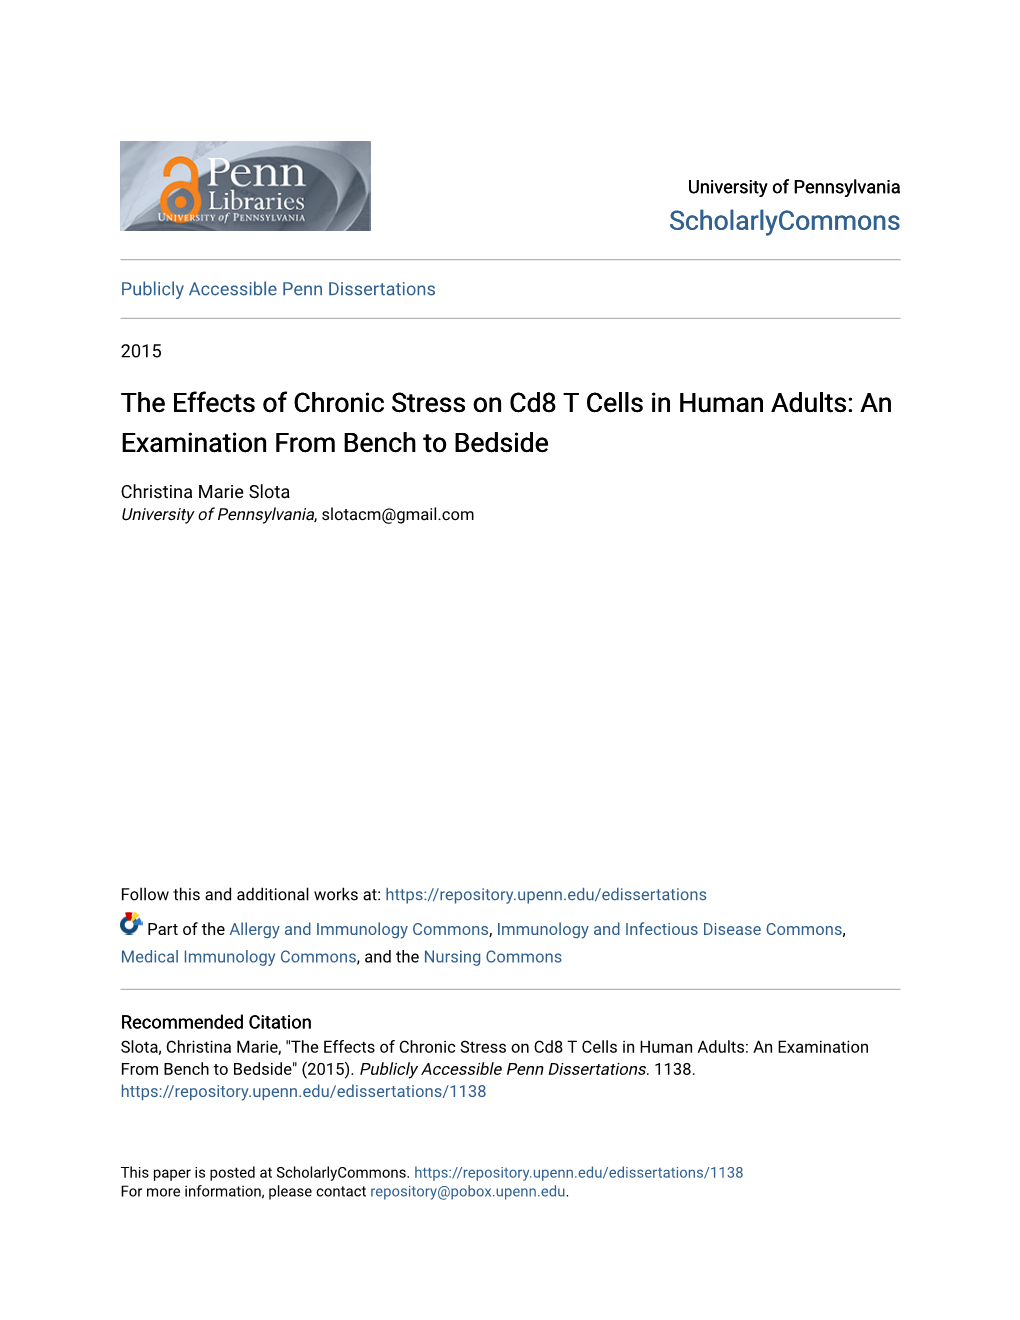 The Effects of Chronic Stress on Cd8 T Cells in Human Adults: an Examination from Bench to Bedside